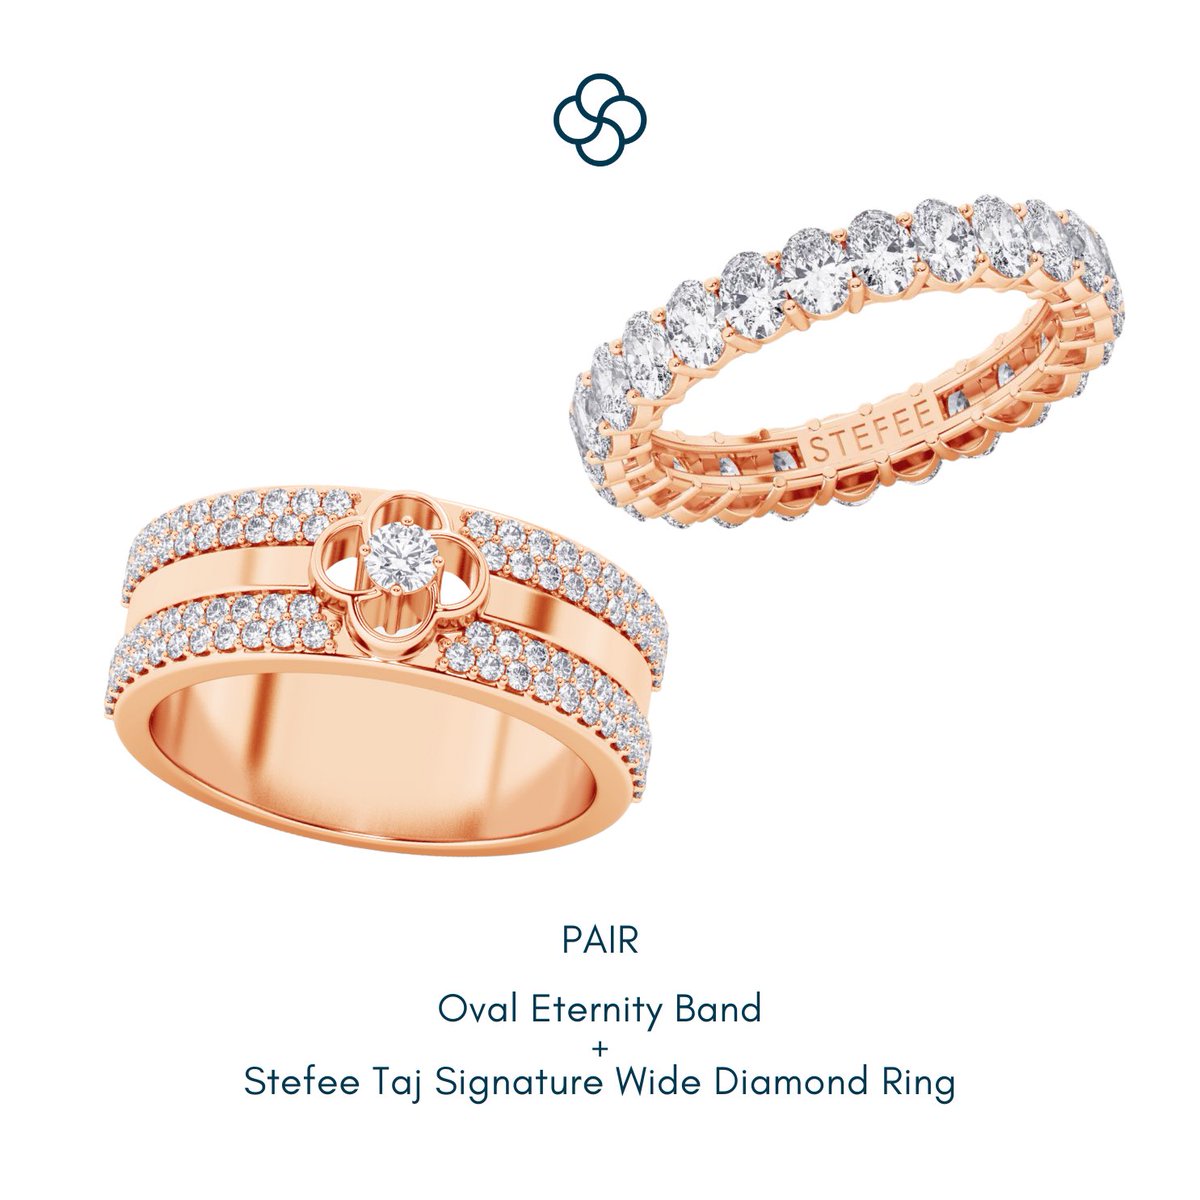 Pairing perfection with our exquisite diamond ring combinations.✨

#diamonds #diamond #jewelry #diamondjewelry #finediamondjewelry #finejewelry #diamondrings #diamondring #ringpairings #ringstack #eternityband #eternityring #rosegold #newyork